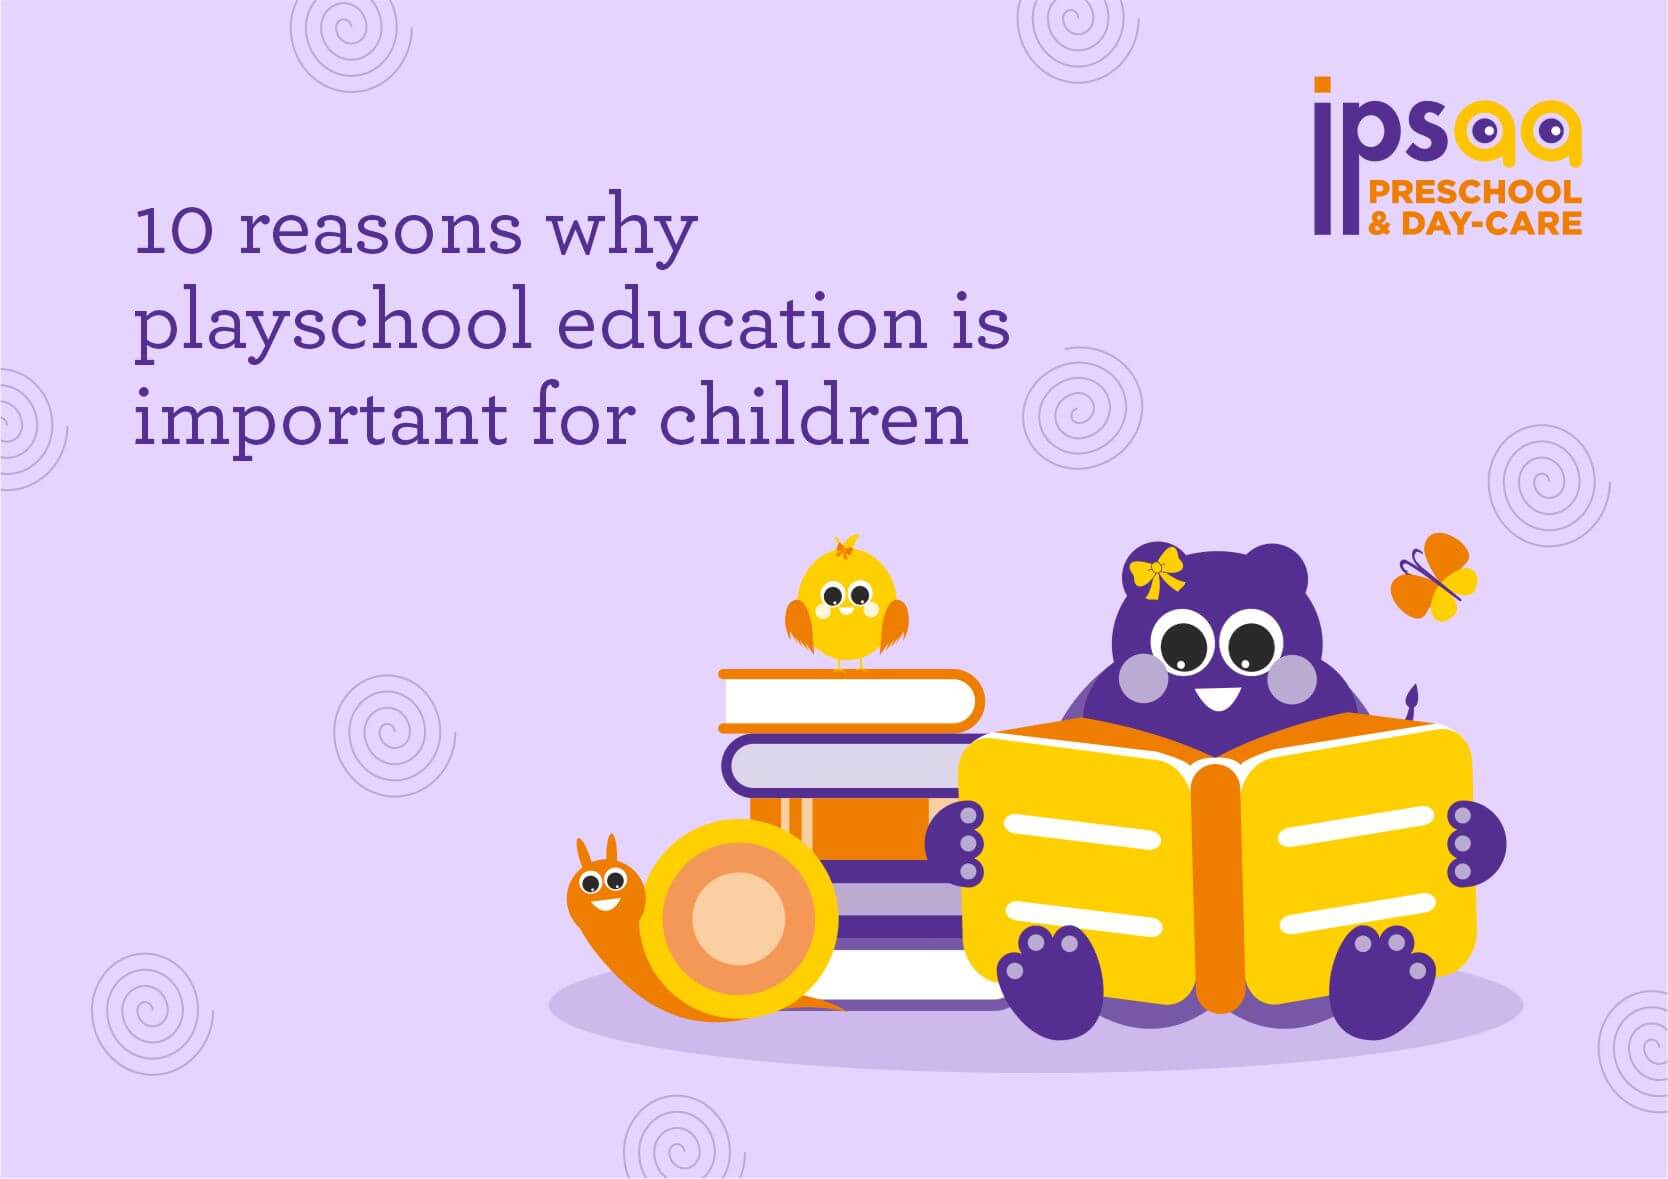 10 reasons why playschool education is important for children